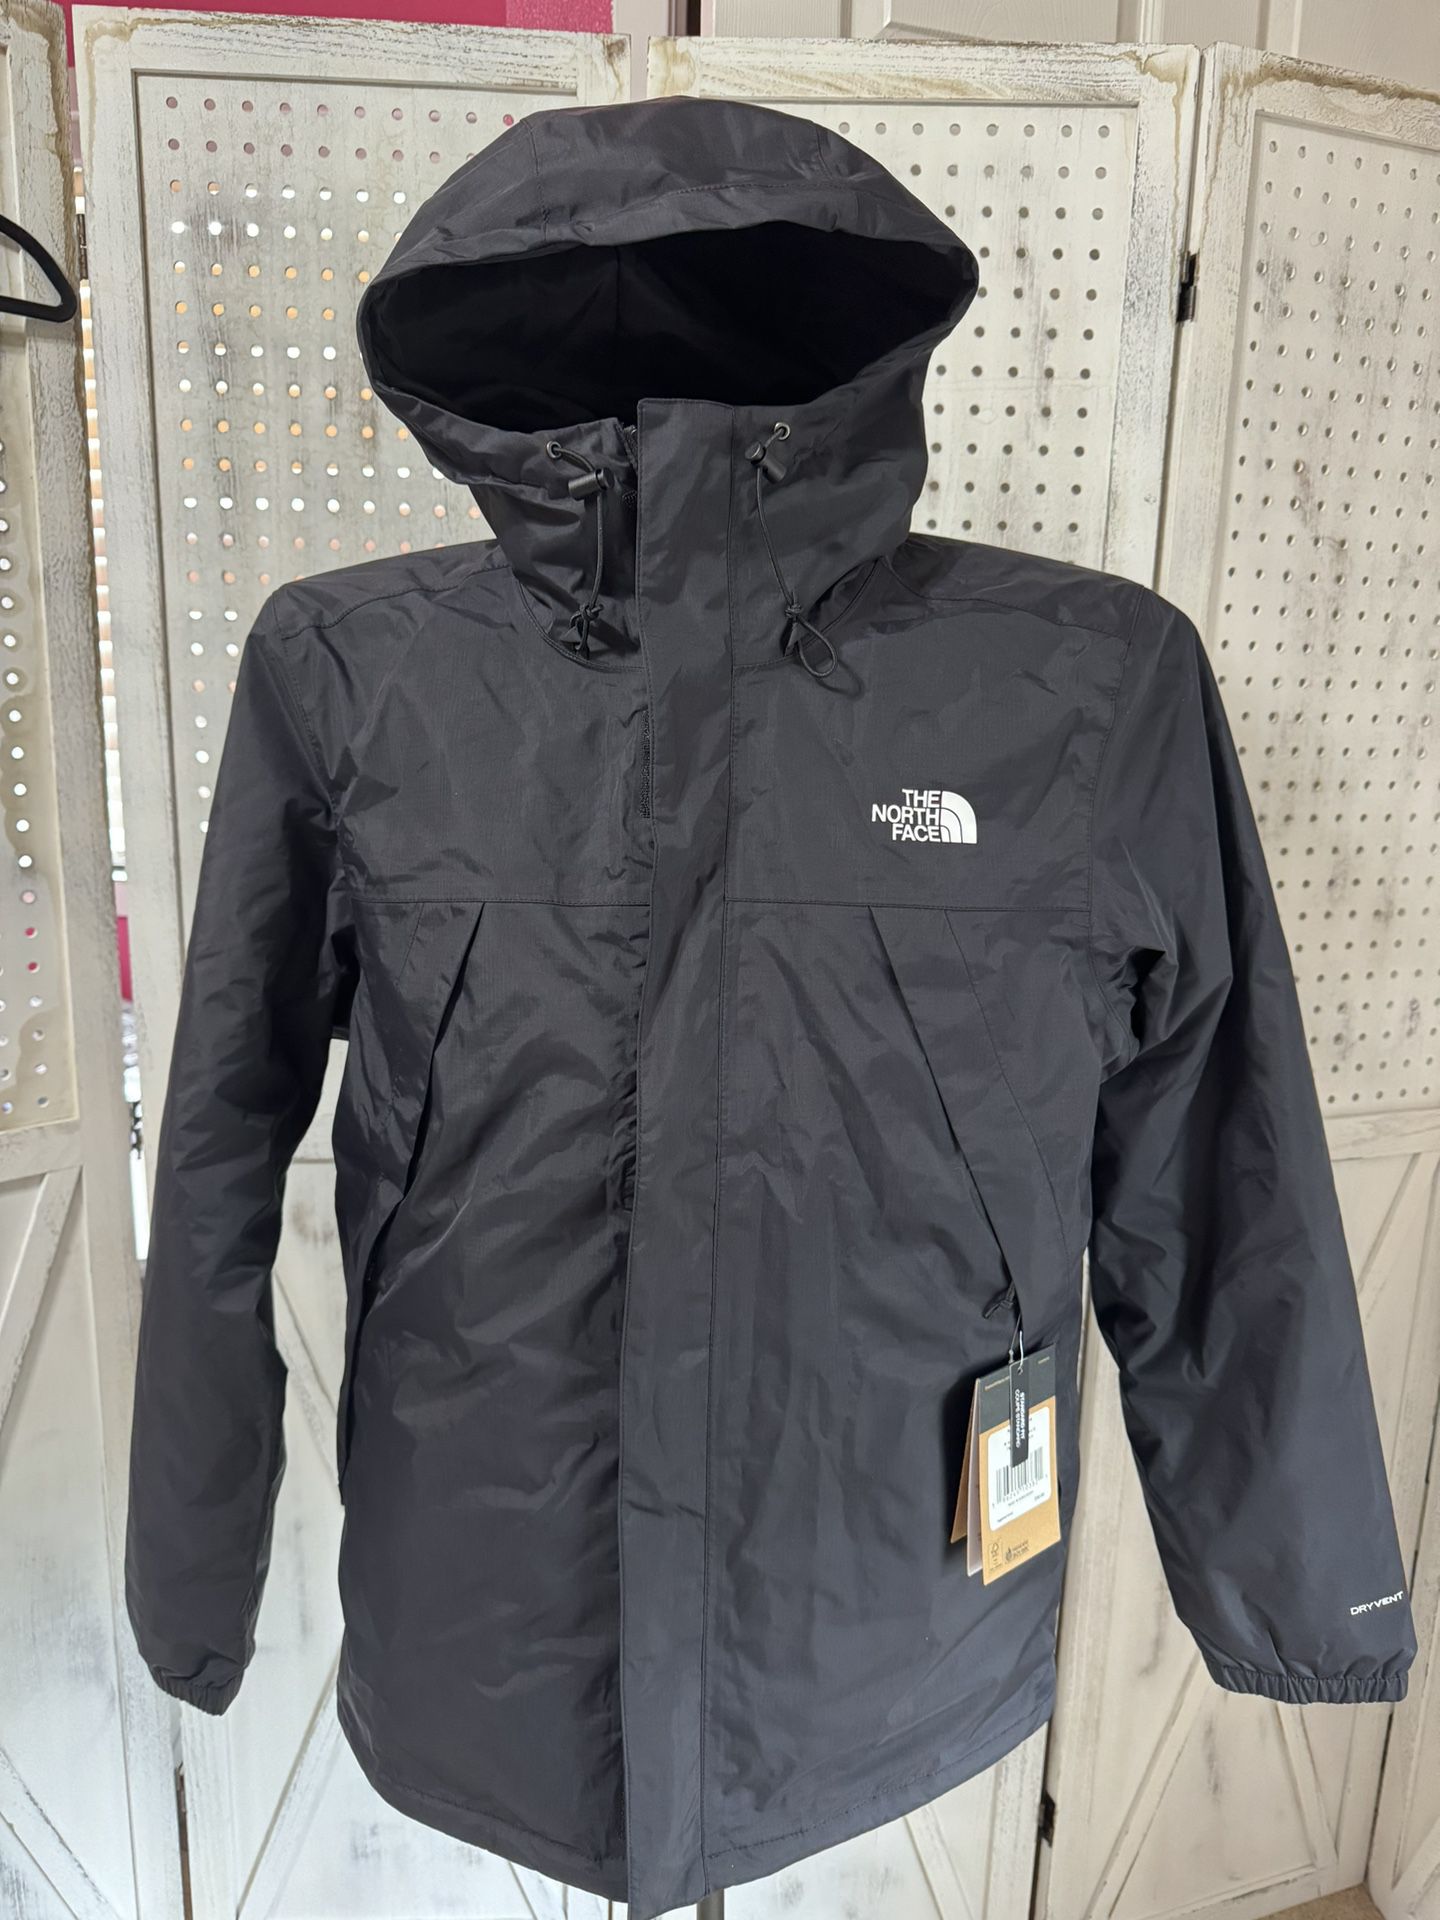  New with tags size Medium THE NORTH FACE Men's Antora Waterproof Jacket